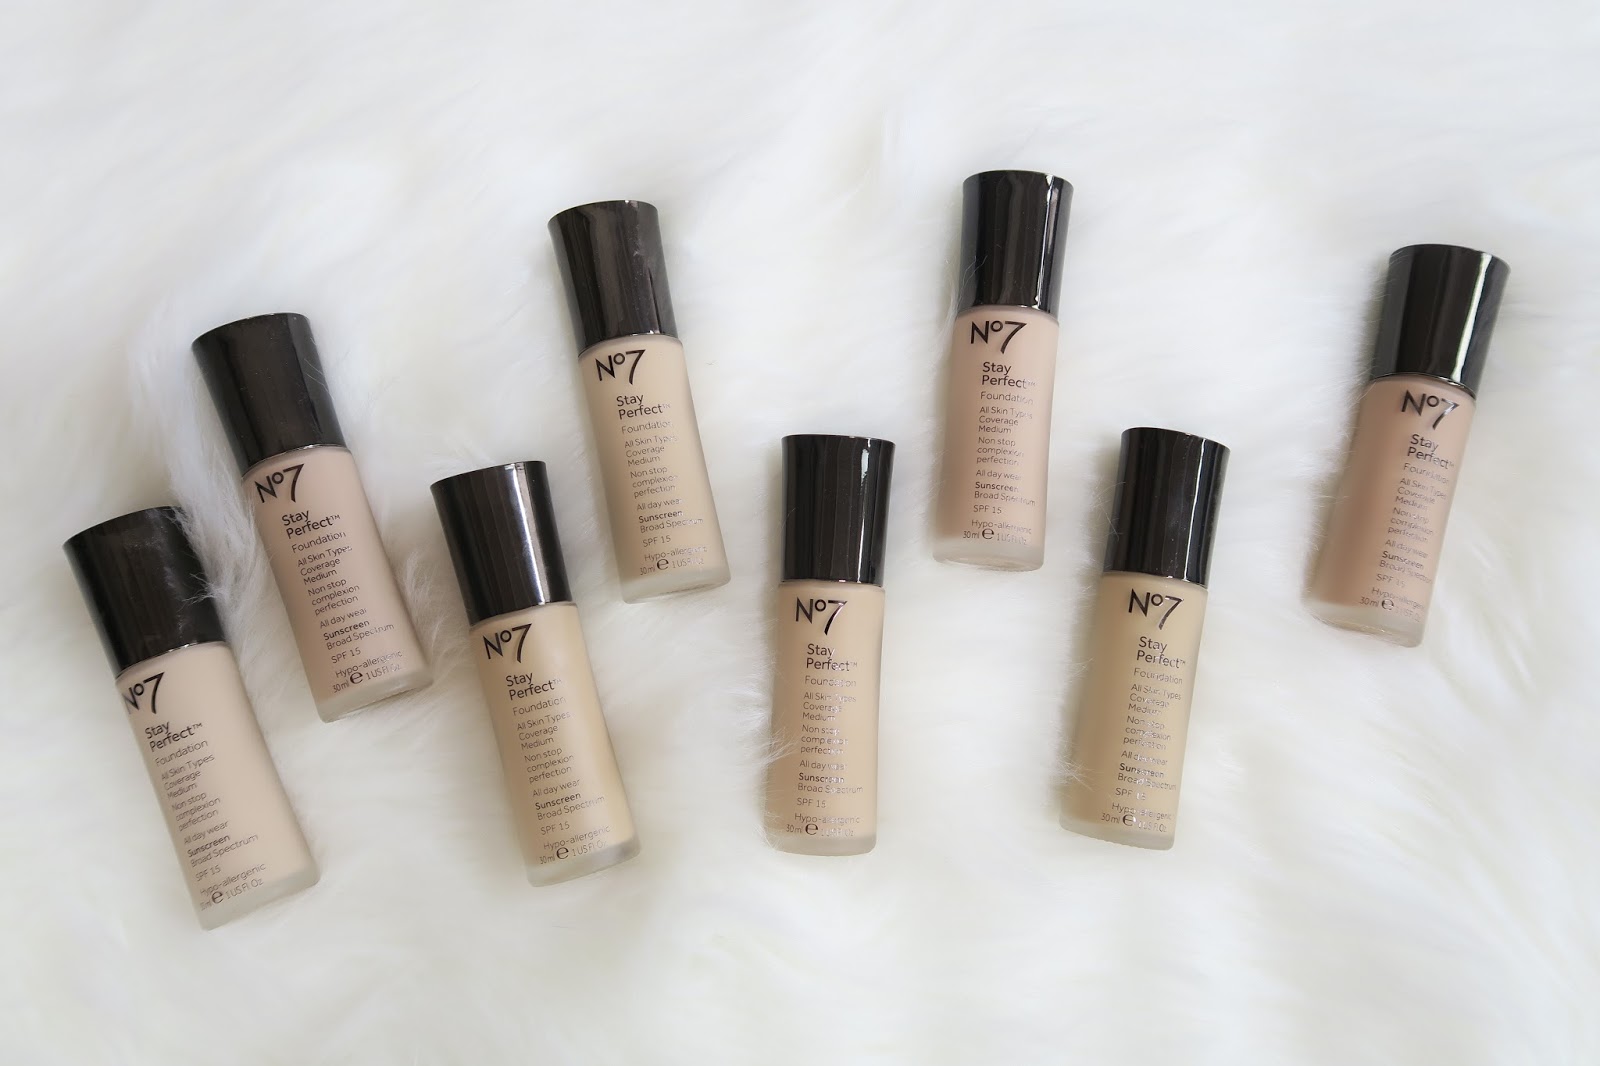 SAM SCHUERMAN: No7 Stay Perfect Foundation Review & Swatches